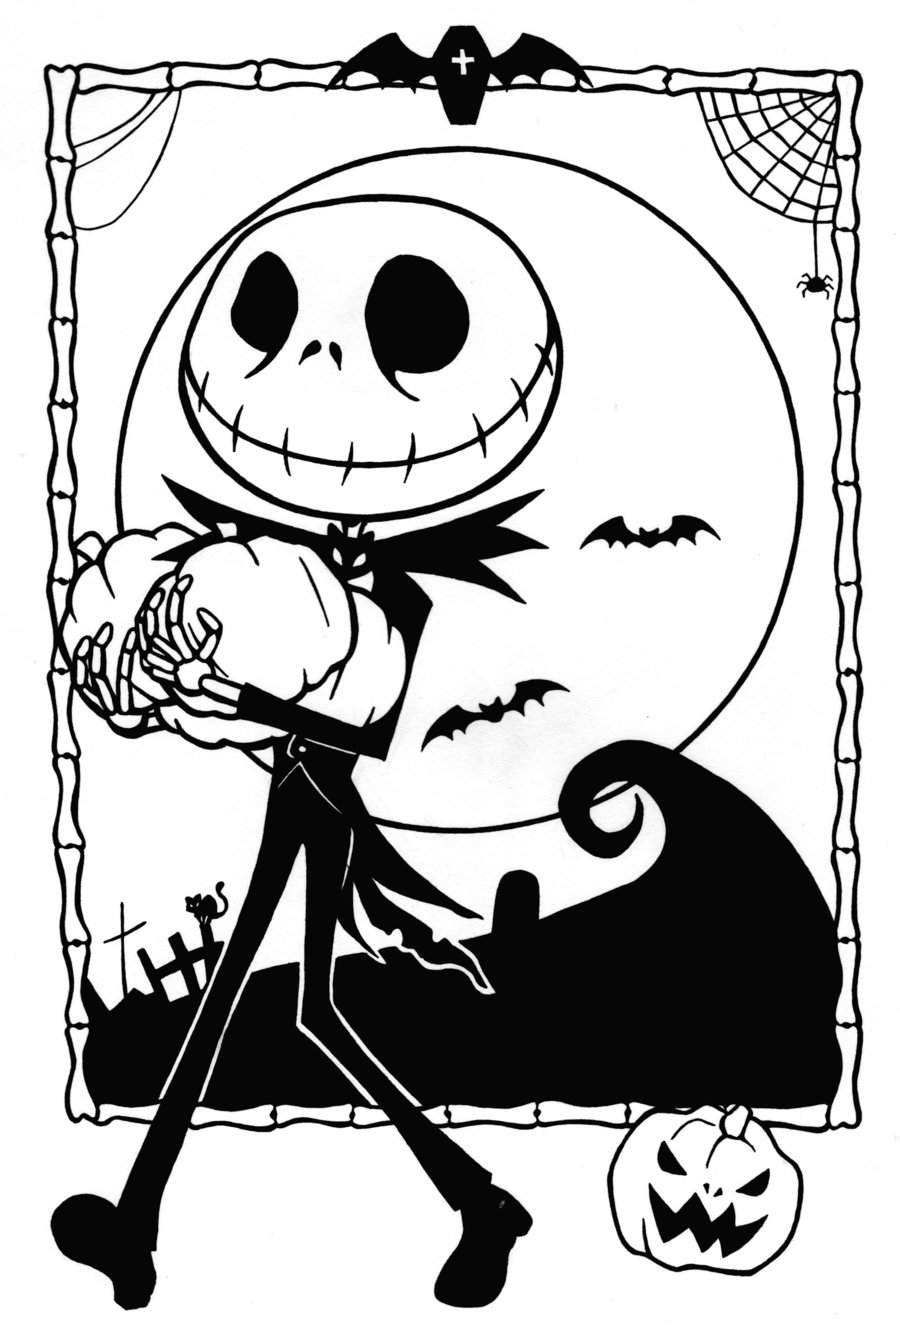 The Nightmare Before Christmas Coloring Book the Nightmare Before Christmas  Coloring Pages 